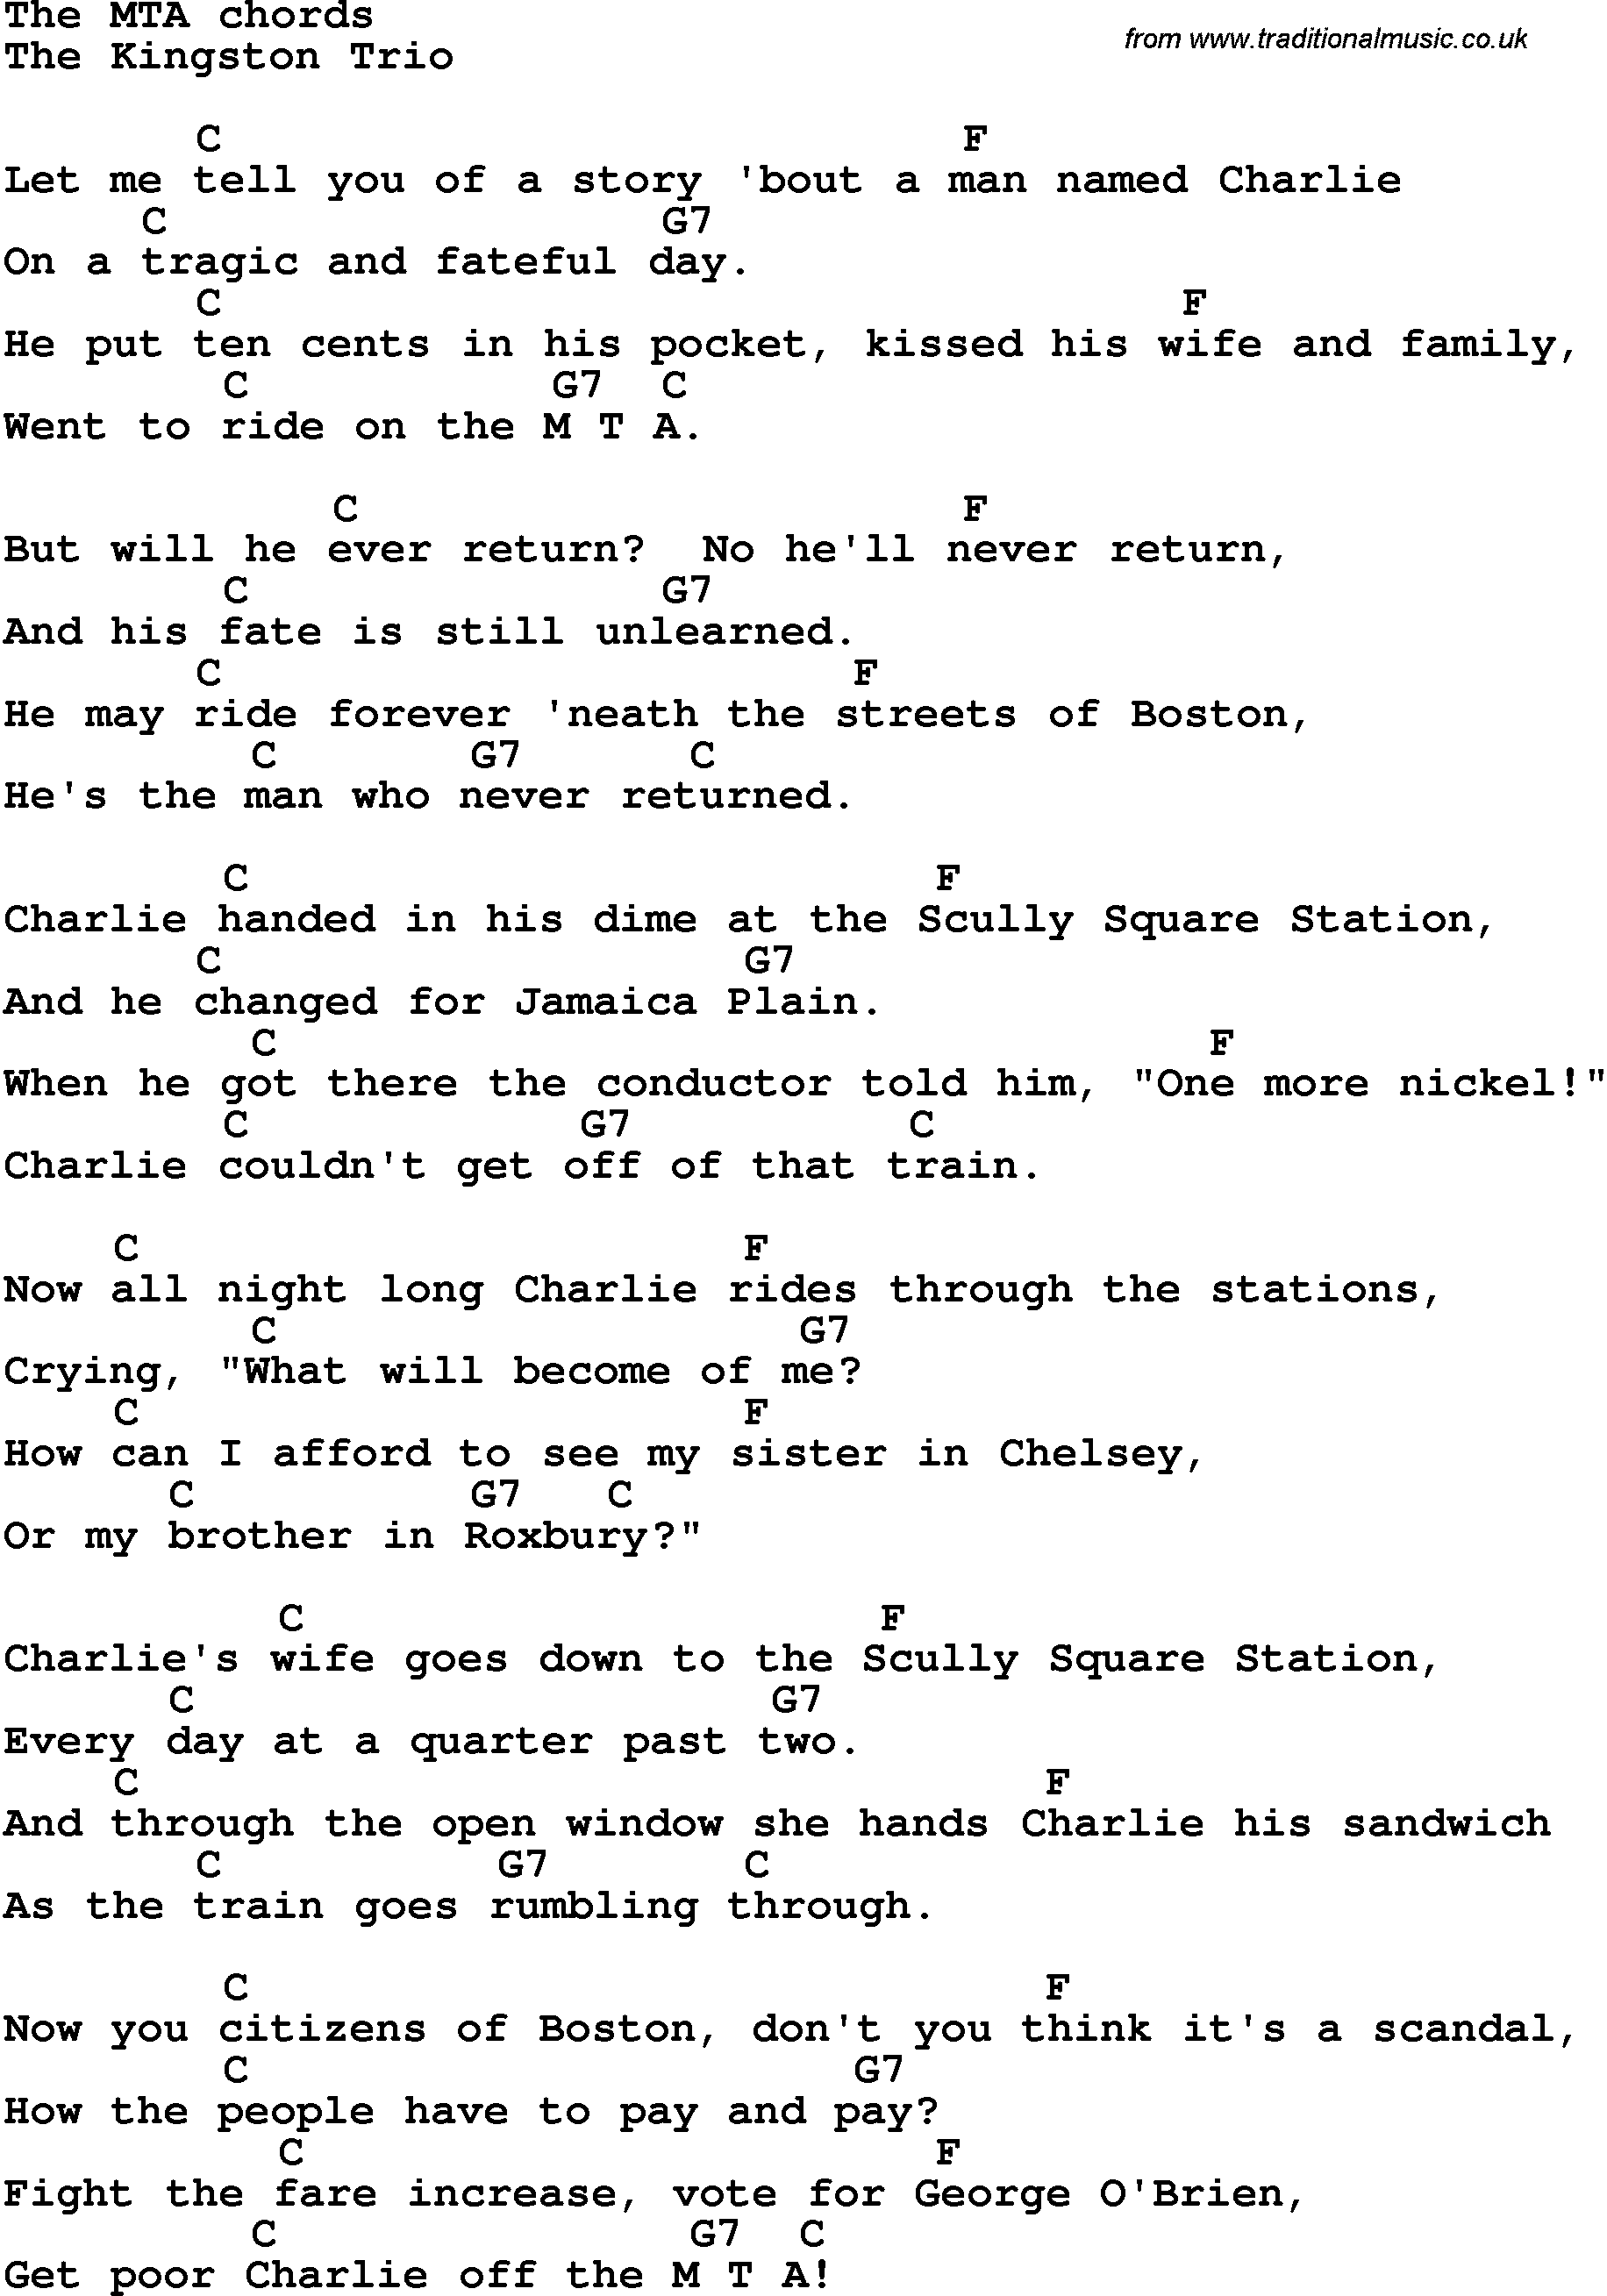 Song Lyrics with guitar chords for The MTA - Kingston Trio2